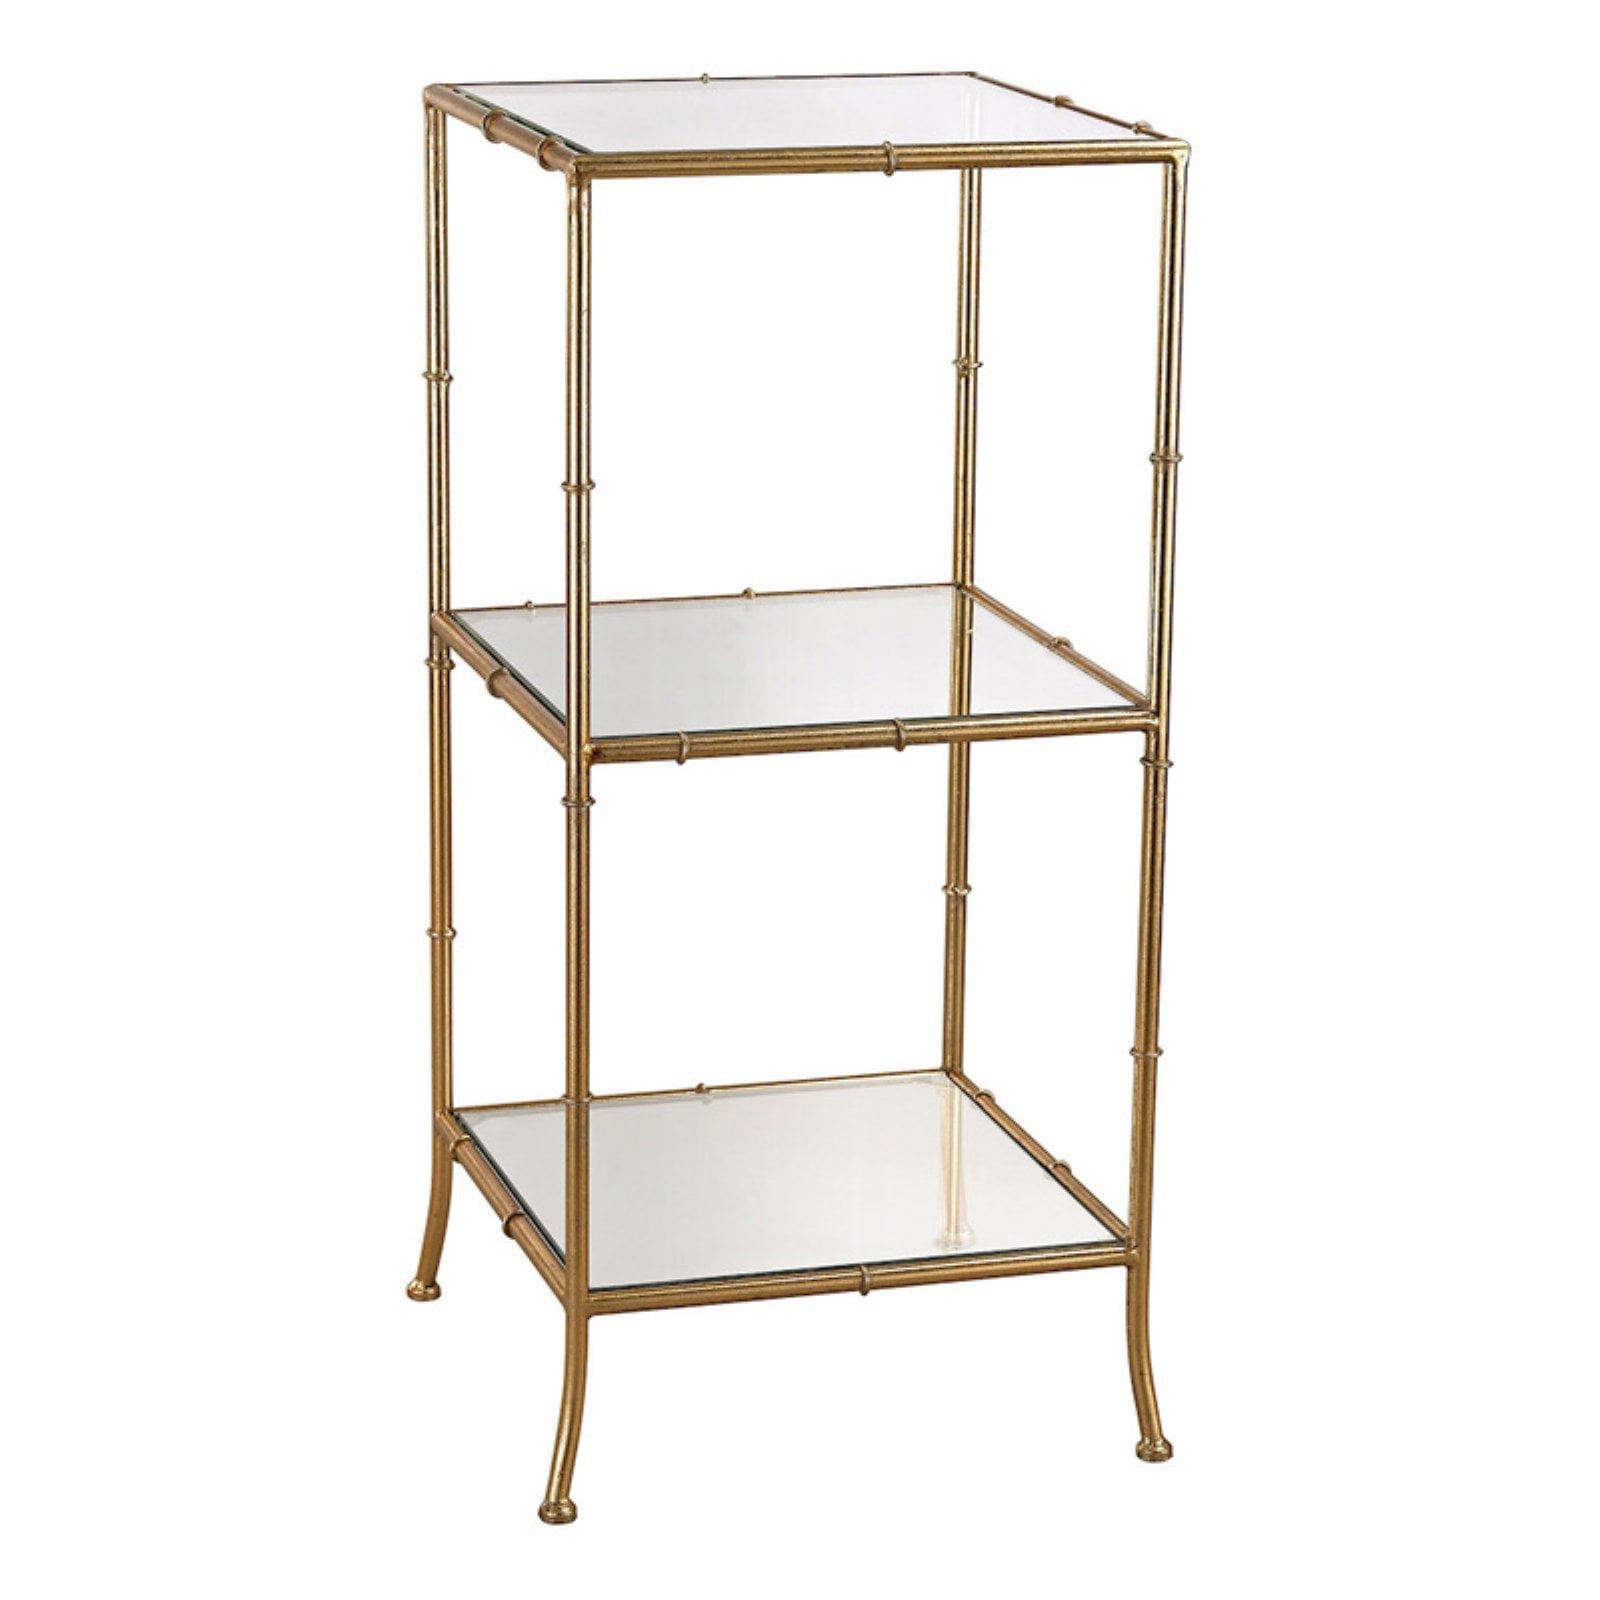 Sterling Bamboo Gold Leaf 14" Accent Shelving Unit with Mirrored Glass